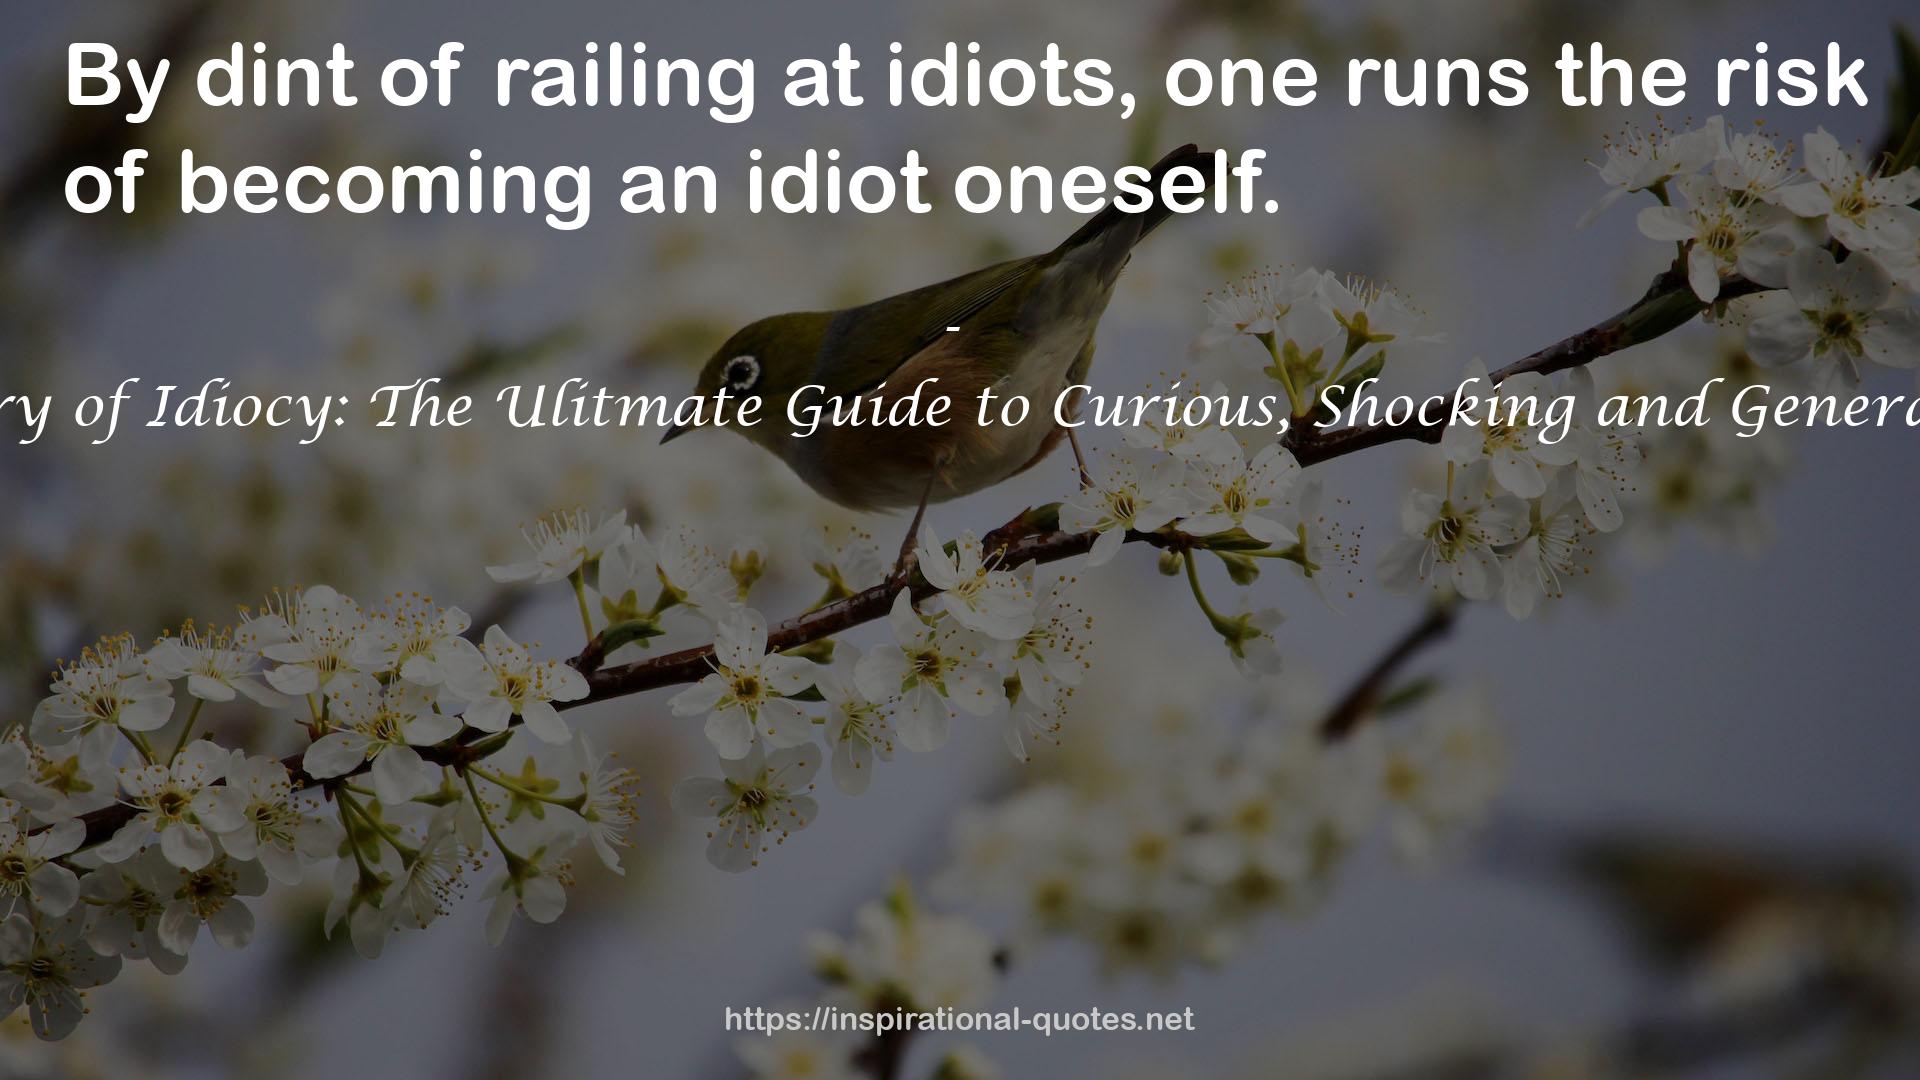 A Dictionary of Idiocy: The Ulitmate Guide to Curious, Shocking and General Ignorance QUOTES